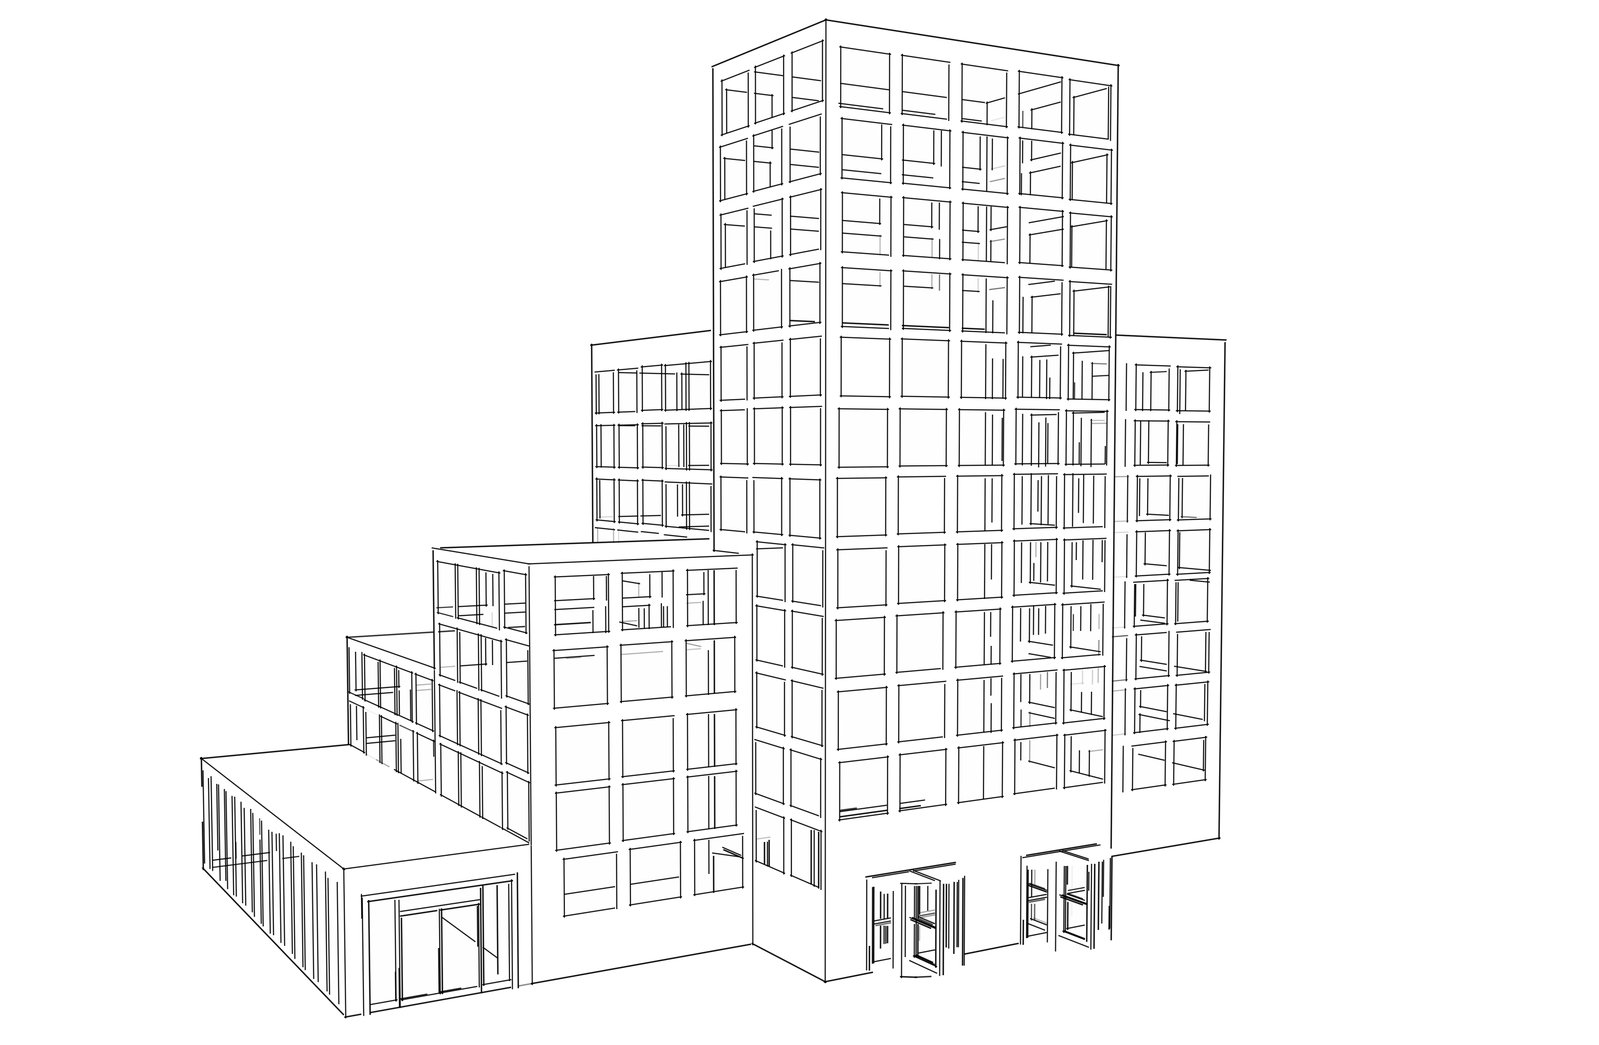 a diagram showing the building in black and white